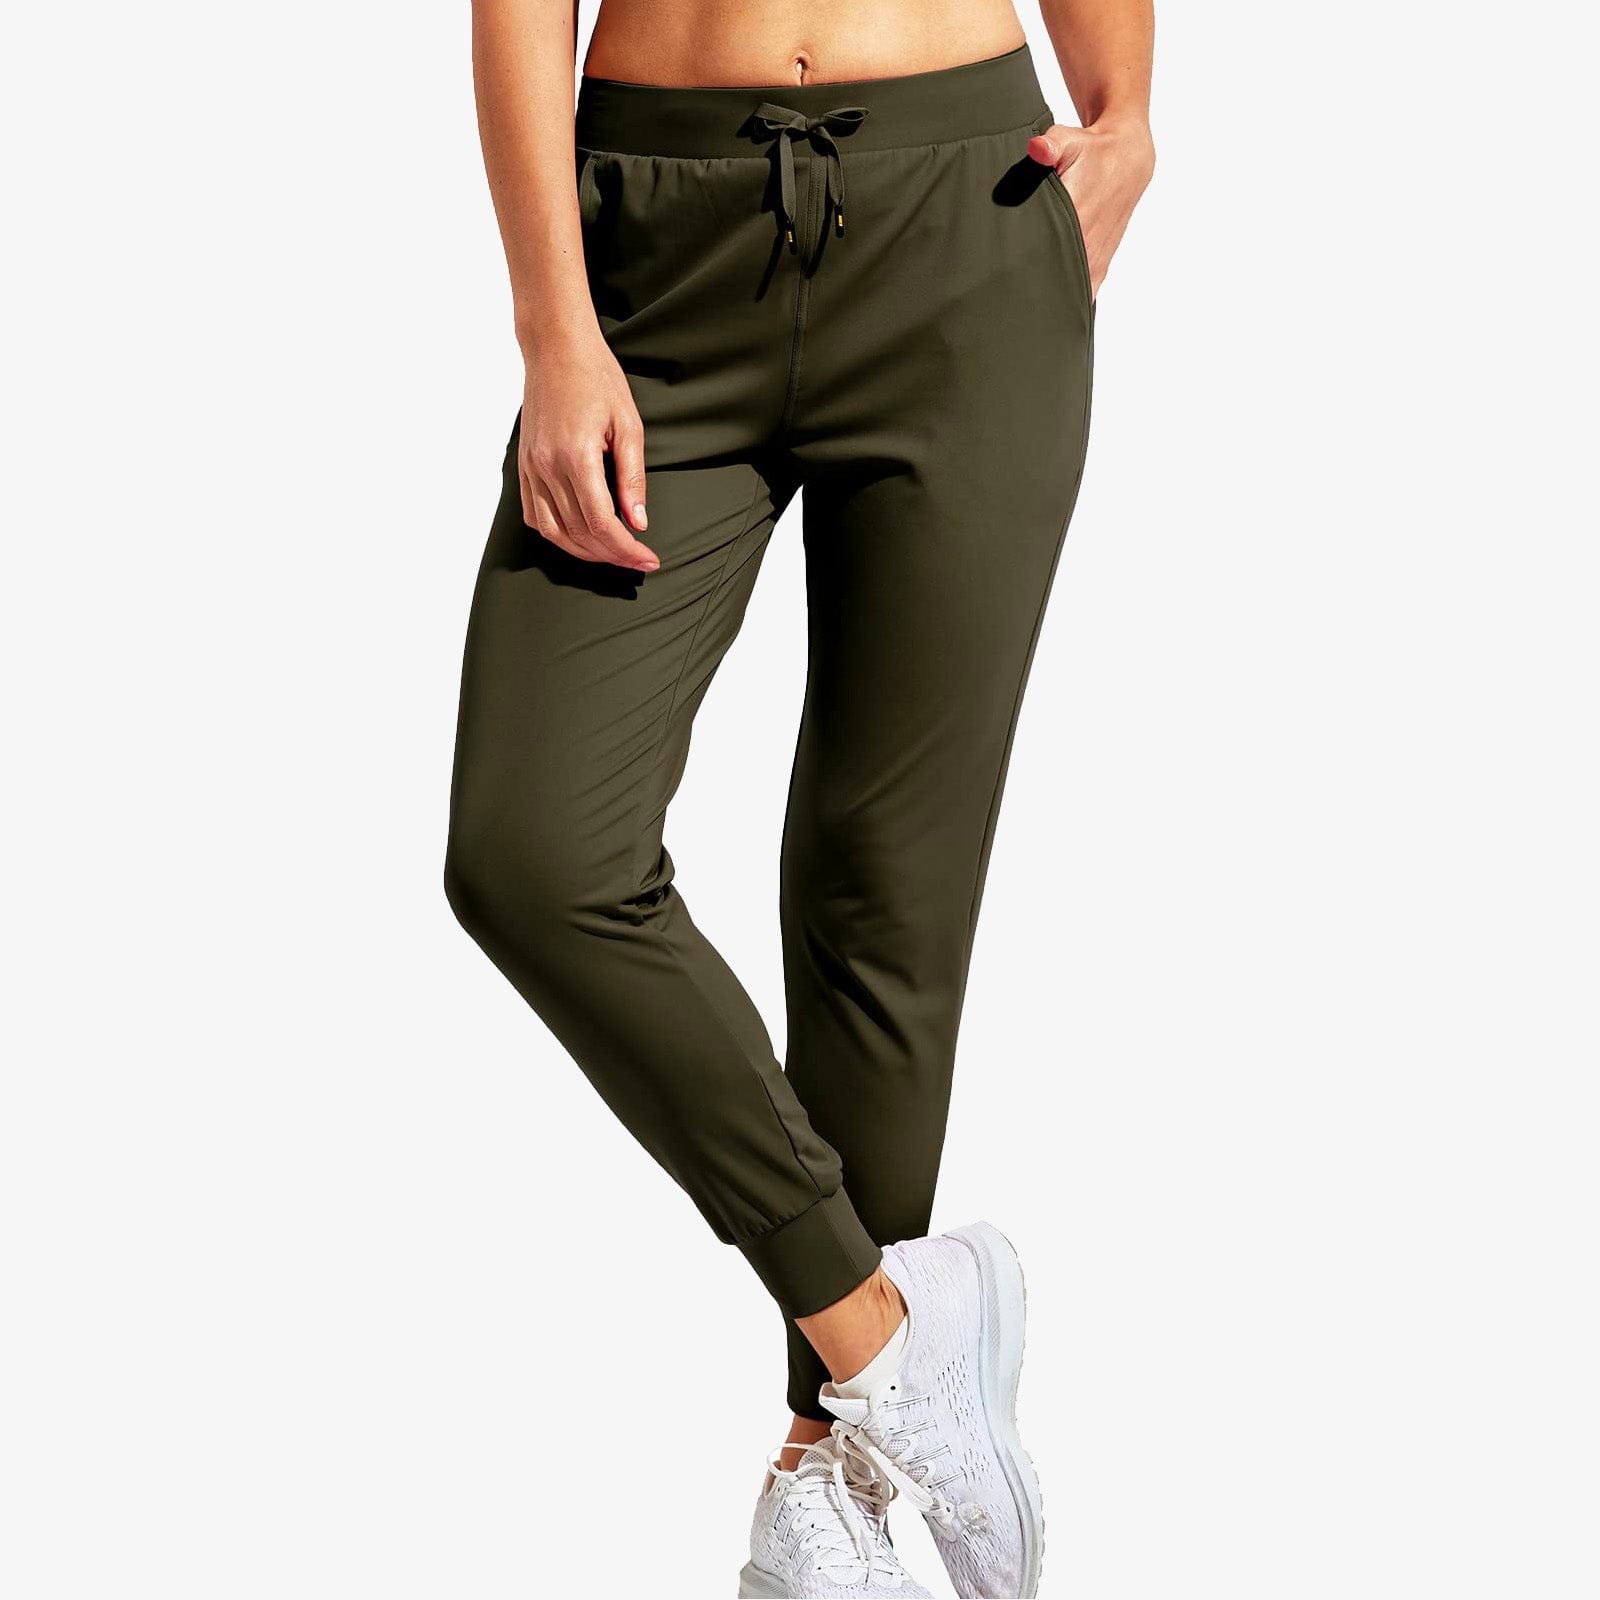 Women's Joggers with Pockets Lightweight Athletic Sweatpants MIER